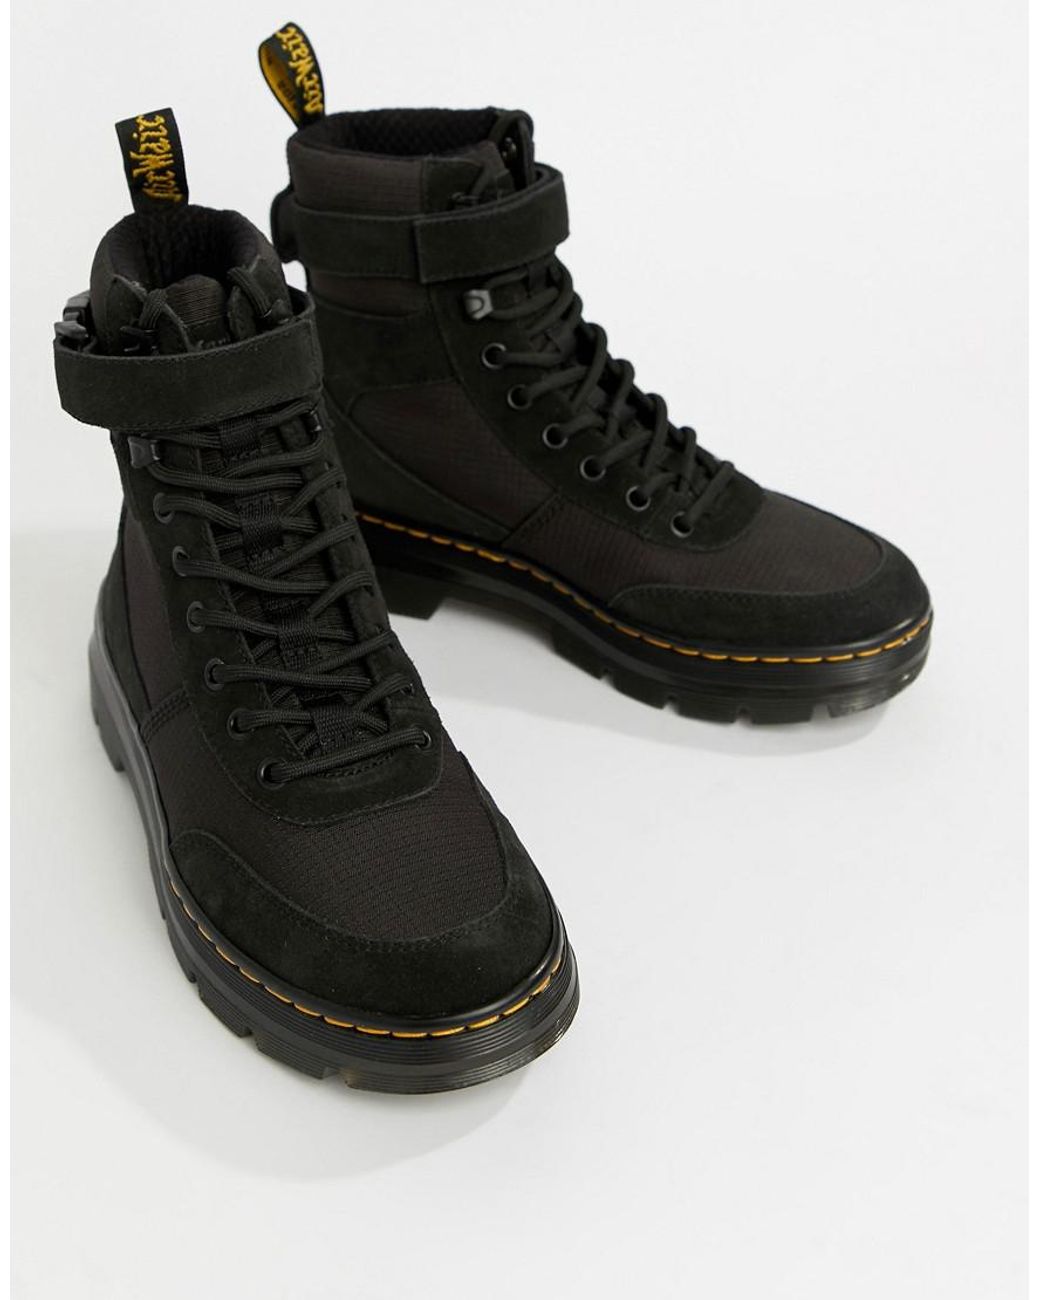 Dr. Martens Combs Black Utility Boots | Lyst